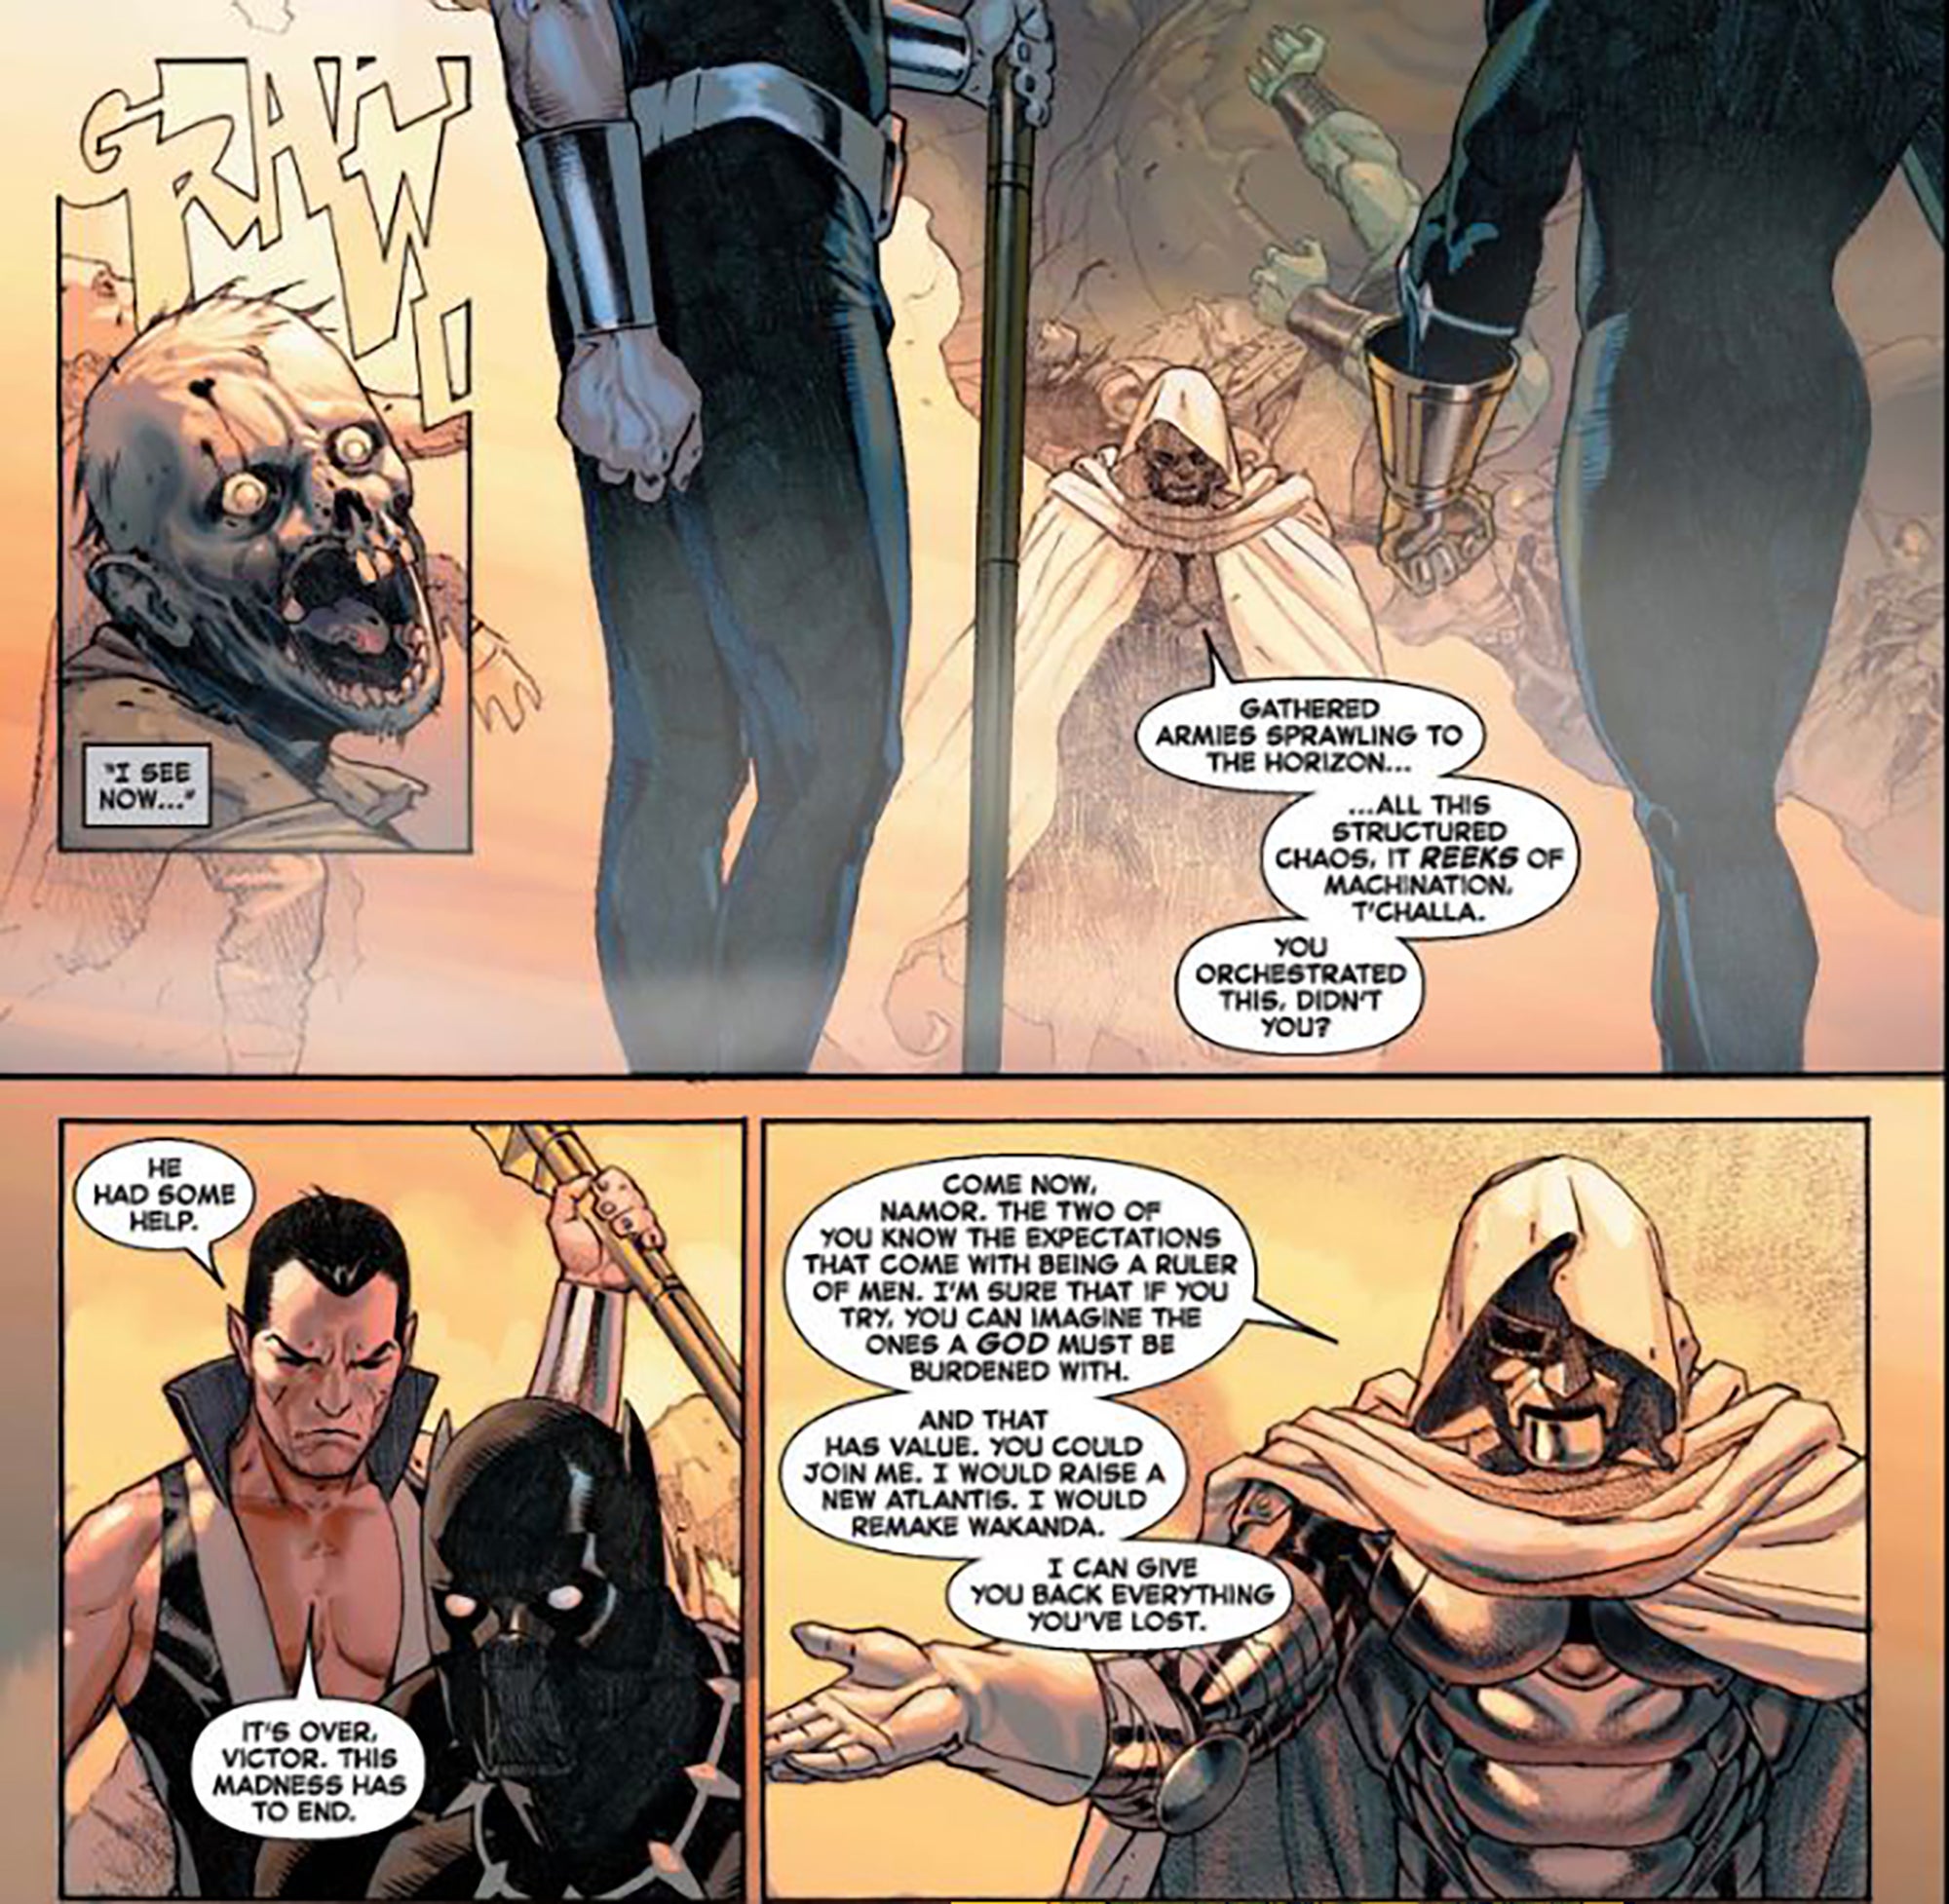 T’Challa and Namor face down Dr. Doom together on Battleworld. From Secret Wars (2015) #9. Written by Jonathan Hickman, Art by Esad Ribic, Color Art by Ive Svorcina, Letters by Clayton Cowles.